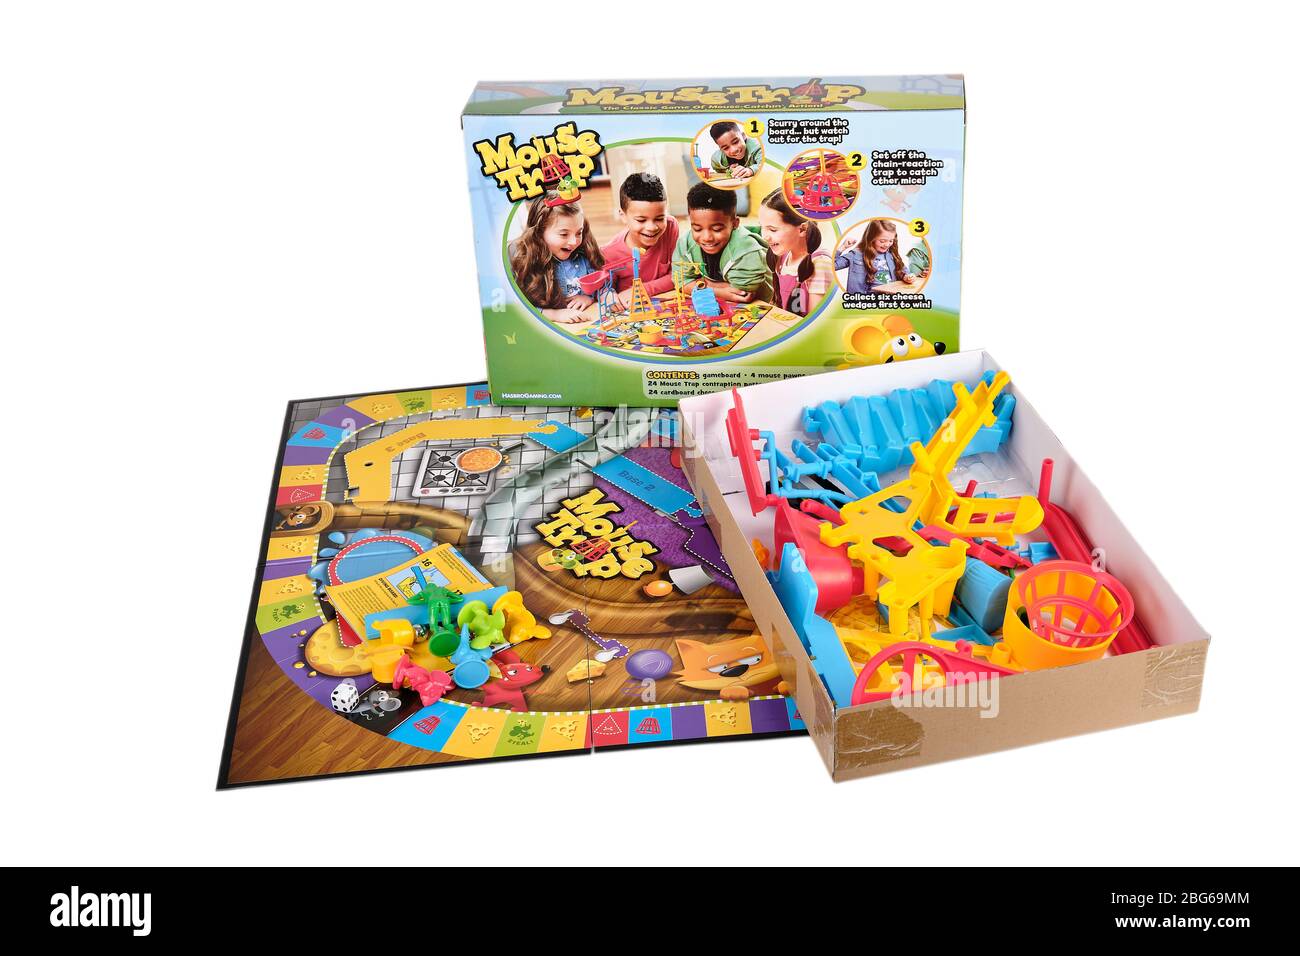 https://c8.alamy.com/comp/2BG69MM/close-up-of-back-of-hasbro-mouse-trap-board-game-box-and-board-and-pieces-ready-to-be-assembled-2BG69MM.jpg